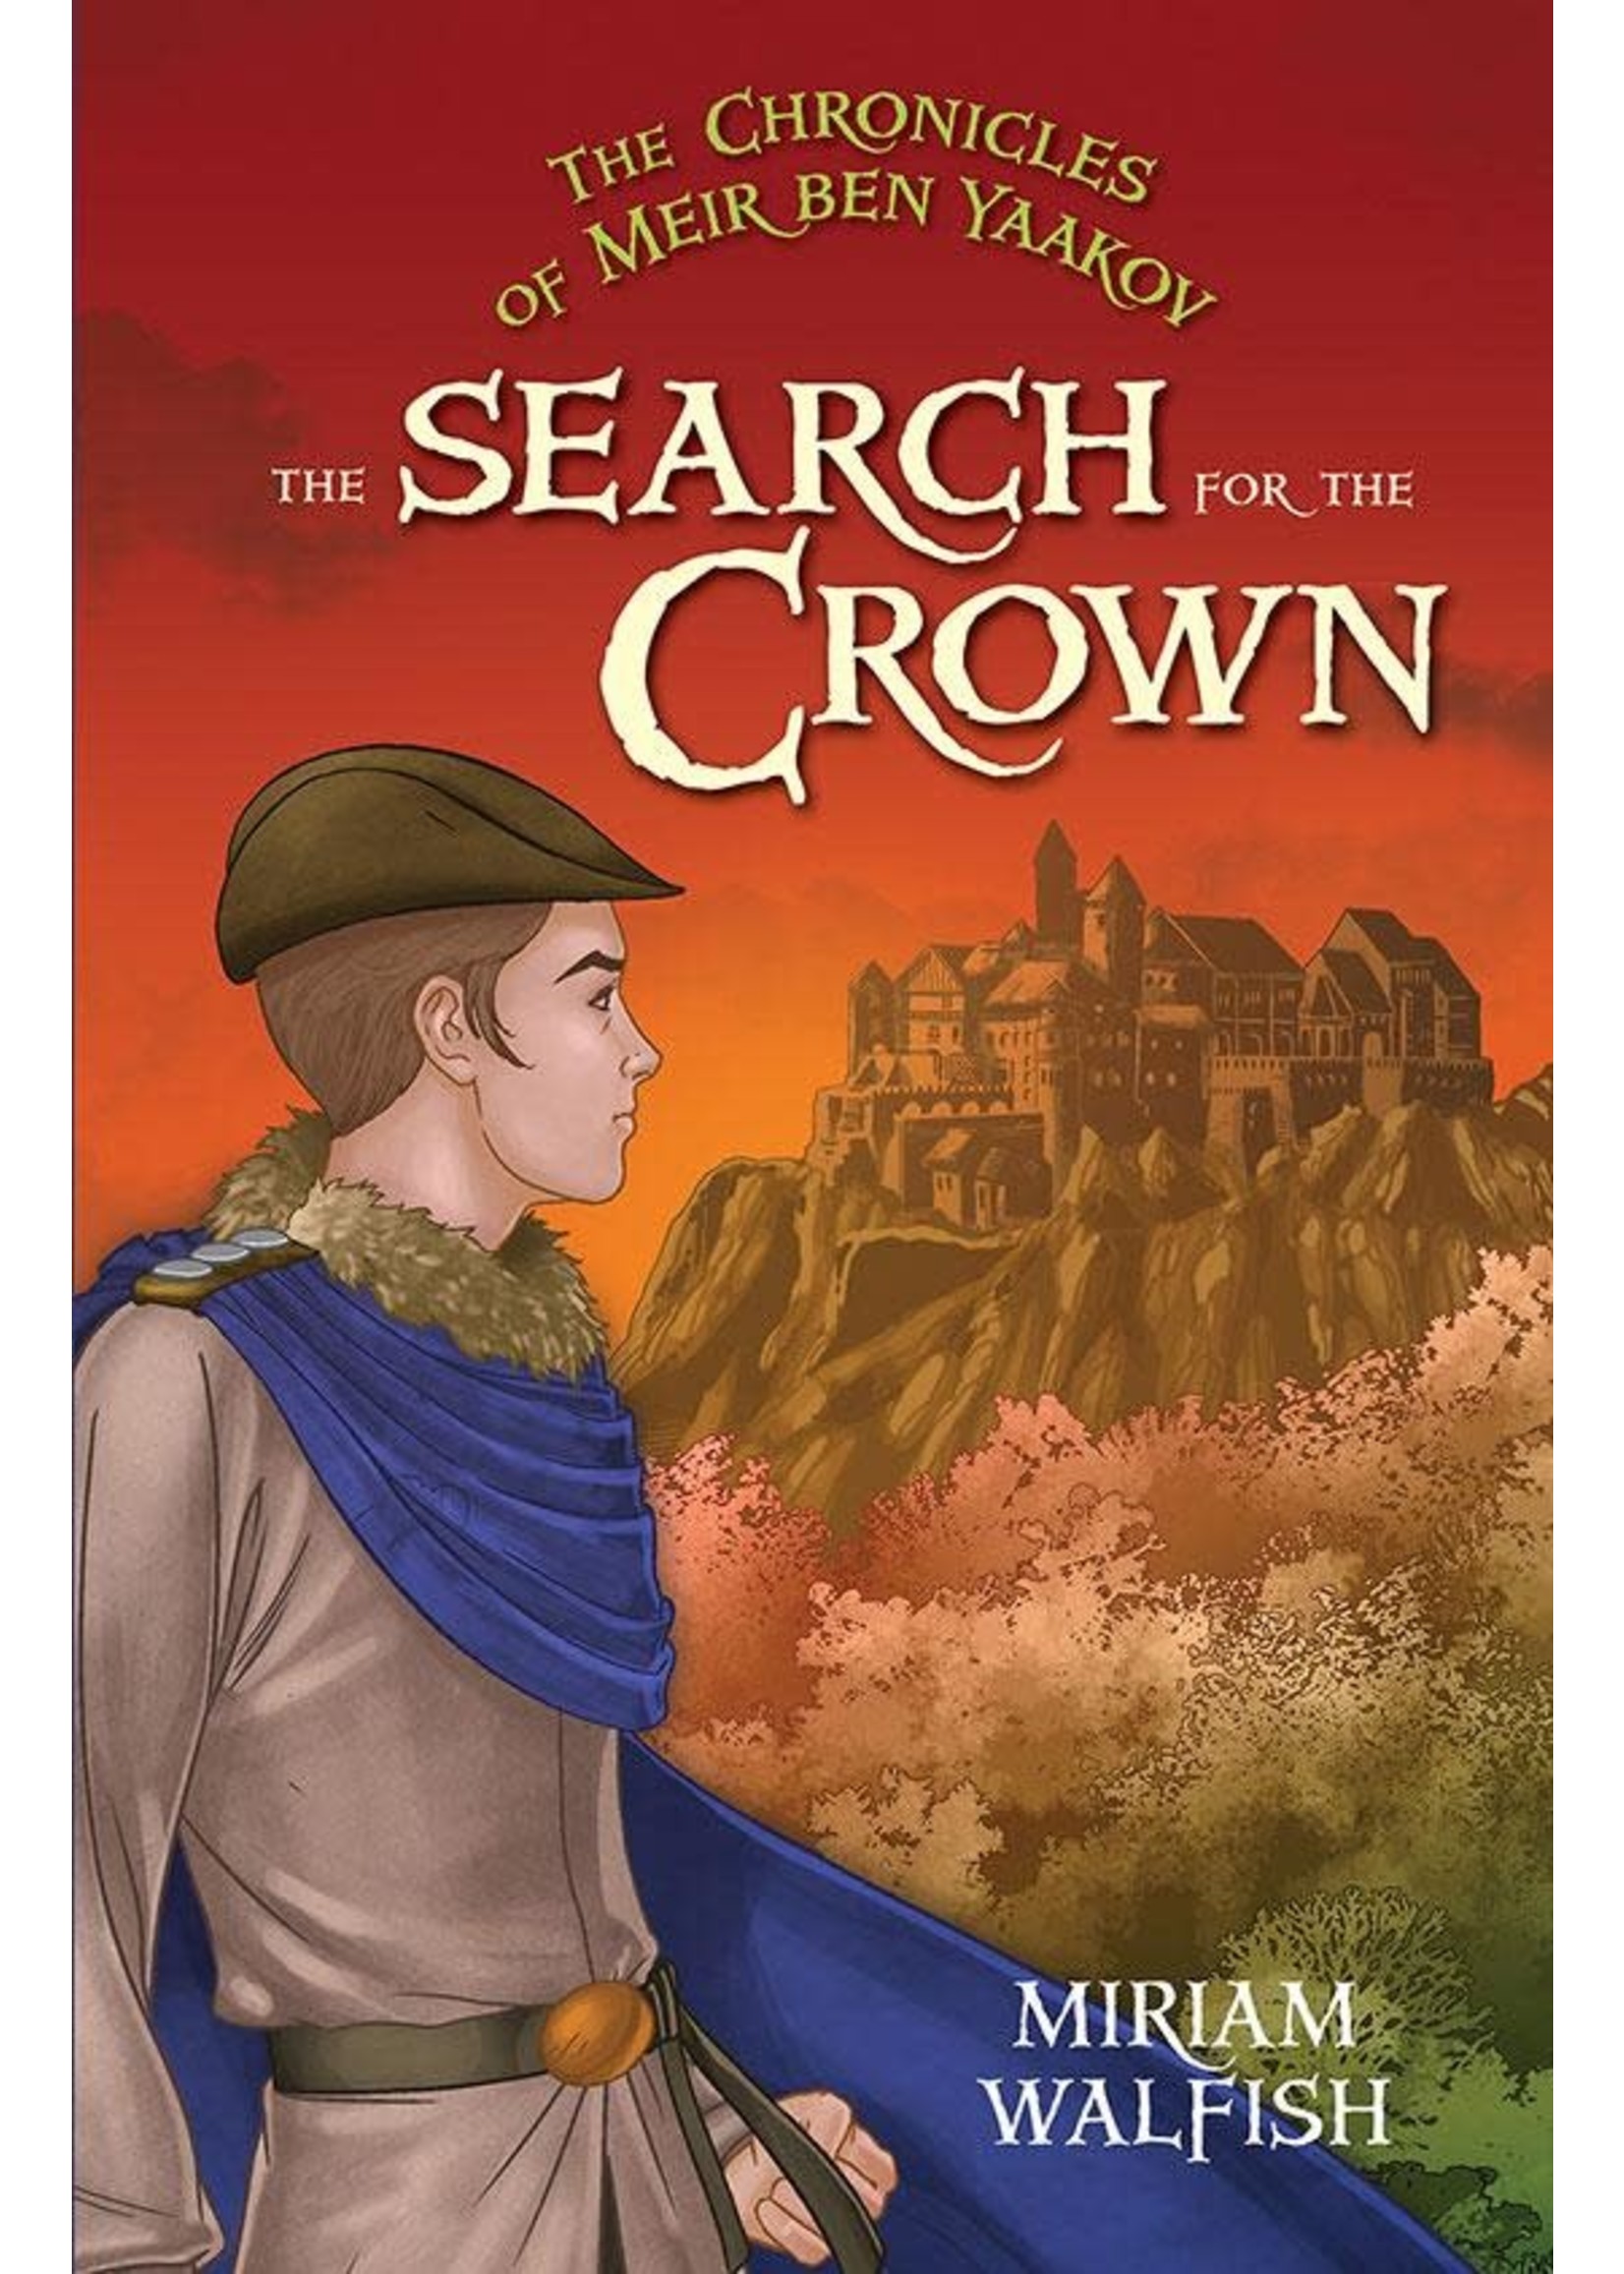 THE SEARCH FOR THE CROWN